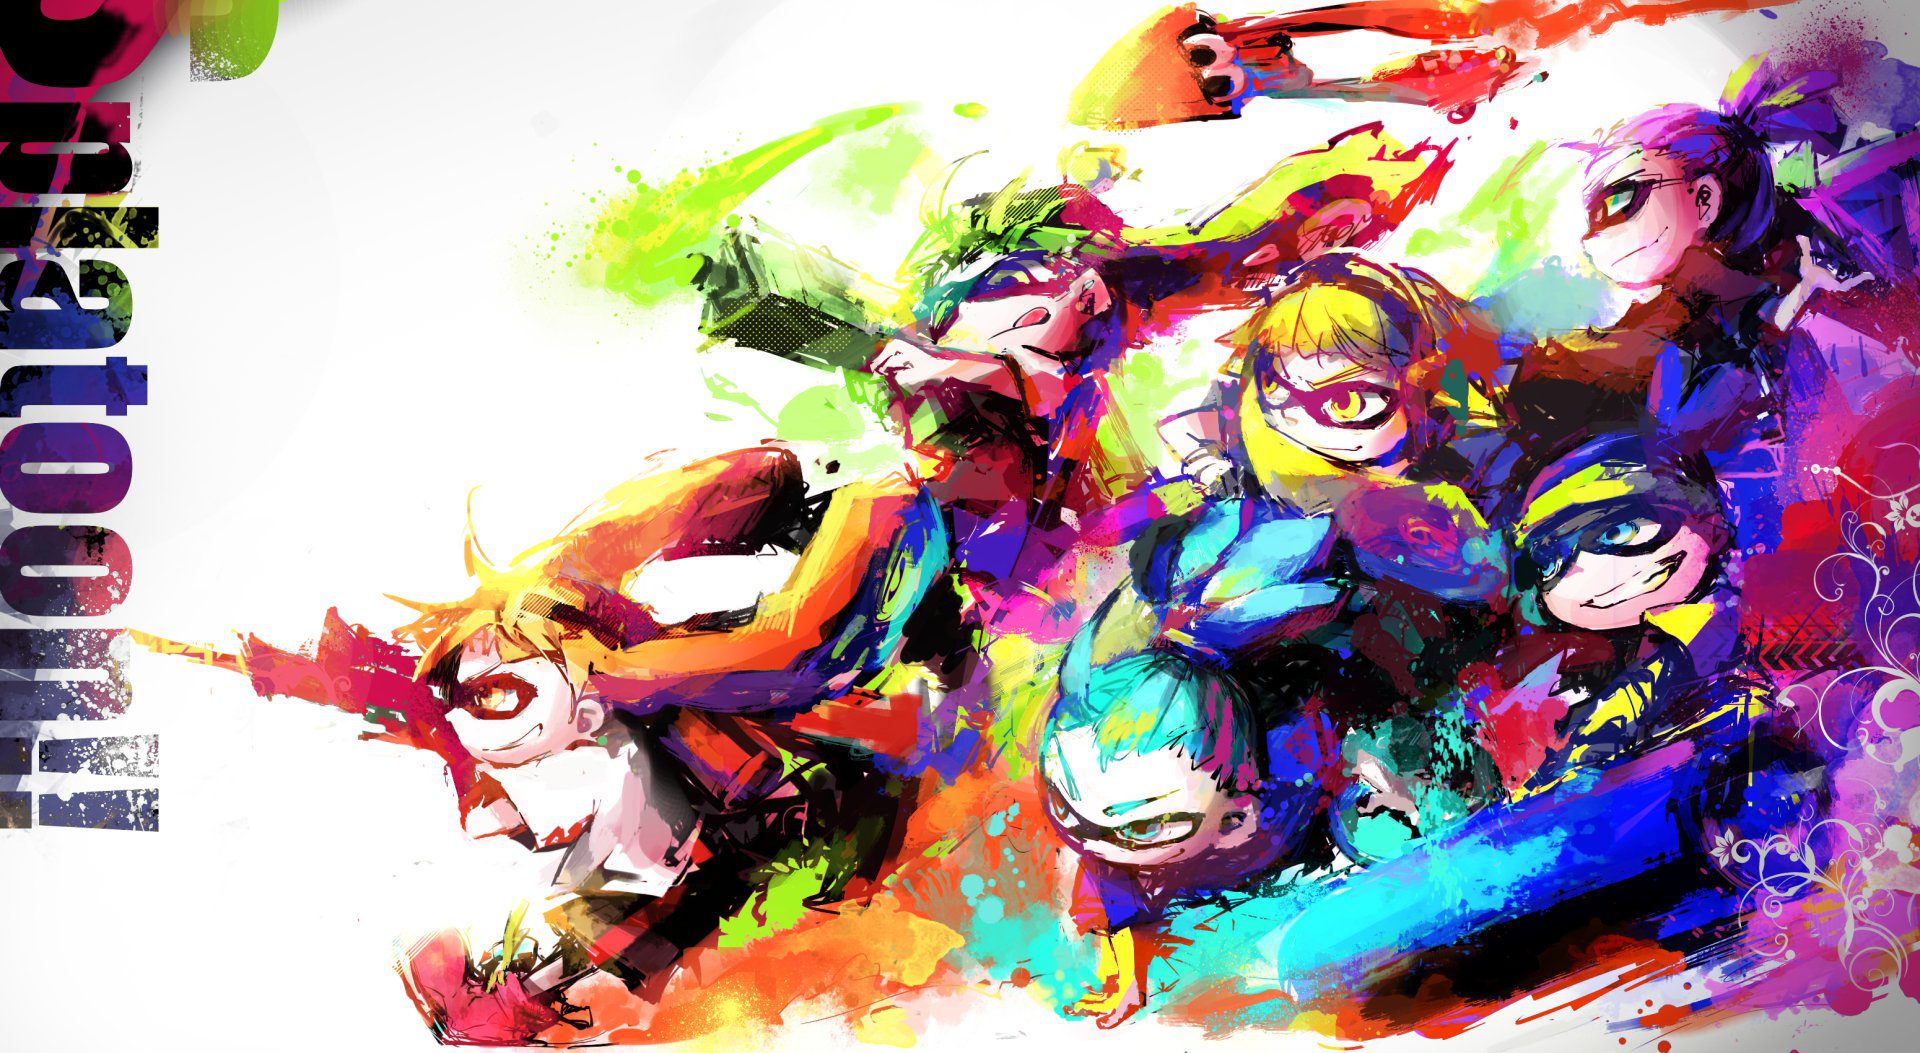 Games that are similar to Splatoon